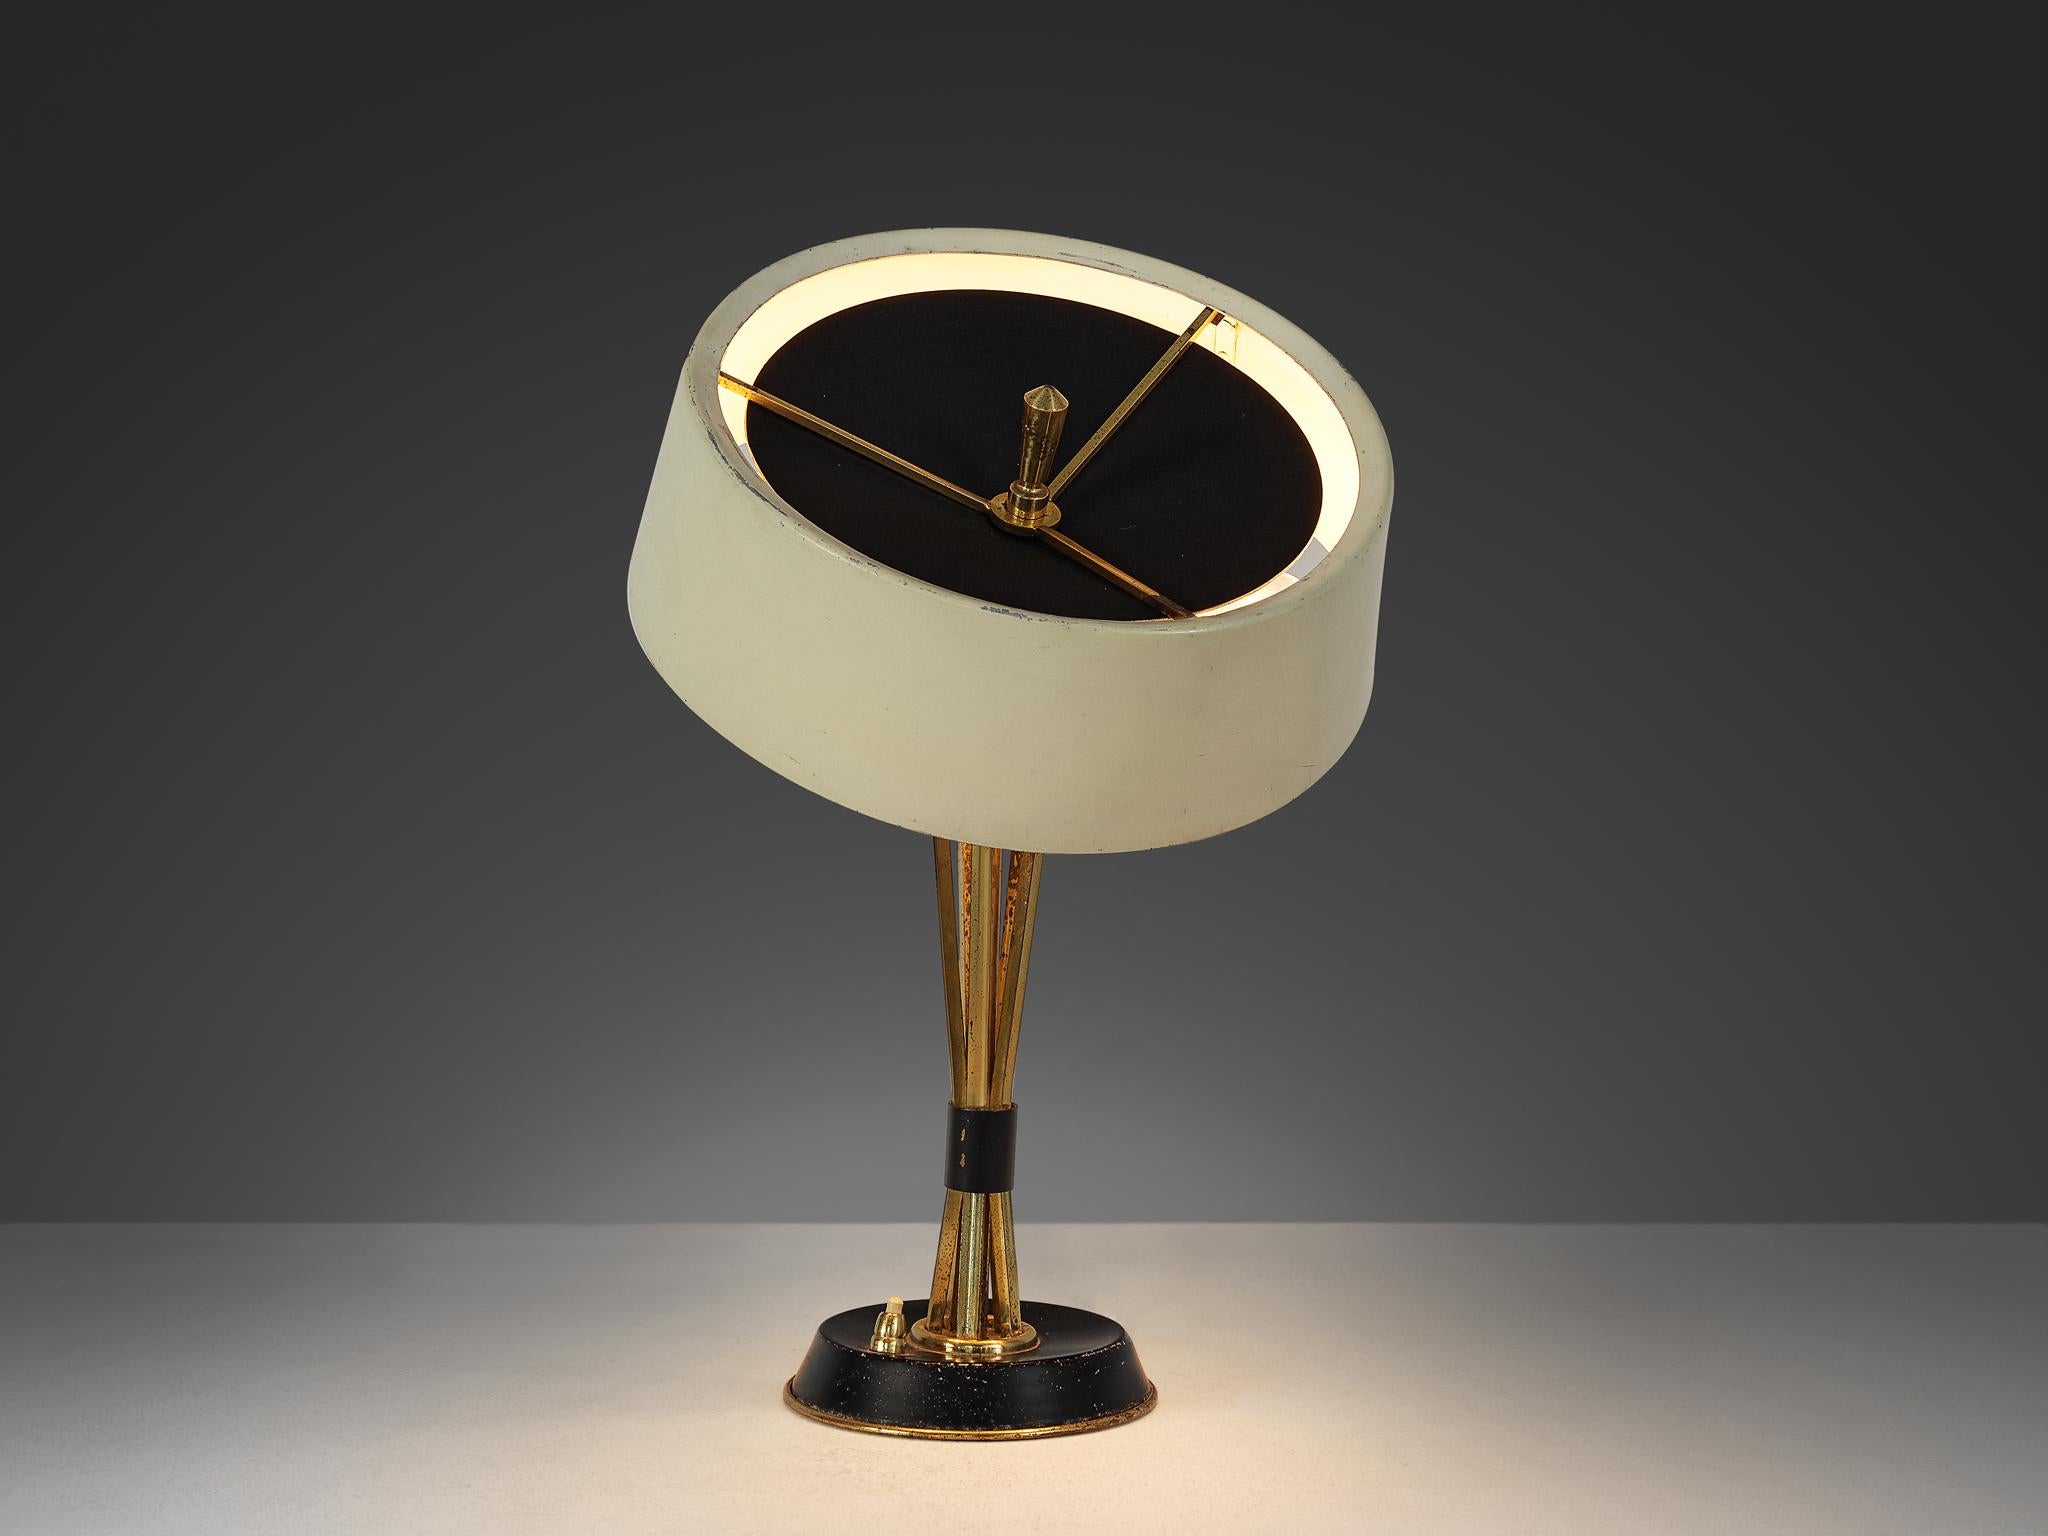 Oscar Torlasco for Lumi Milano, table light in brass and metal, Italy, 1960s.

Very elegant 1960s Italian table lamp designed by Oscar Torlasco for Lumi Milano. The stem is made of patinated brass and holds a smart adjustable round white coated